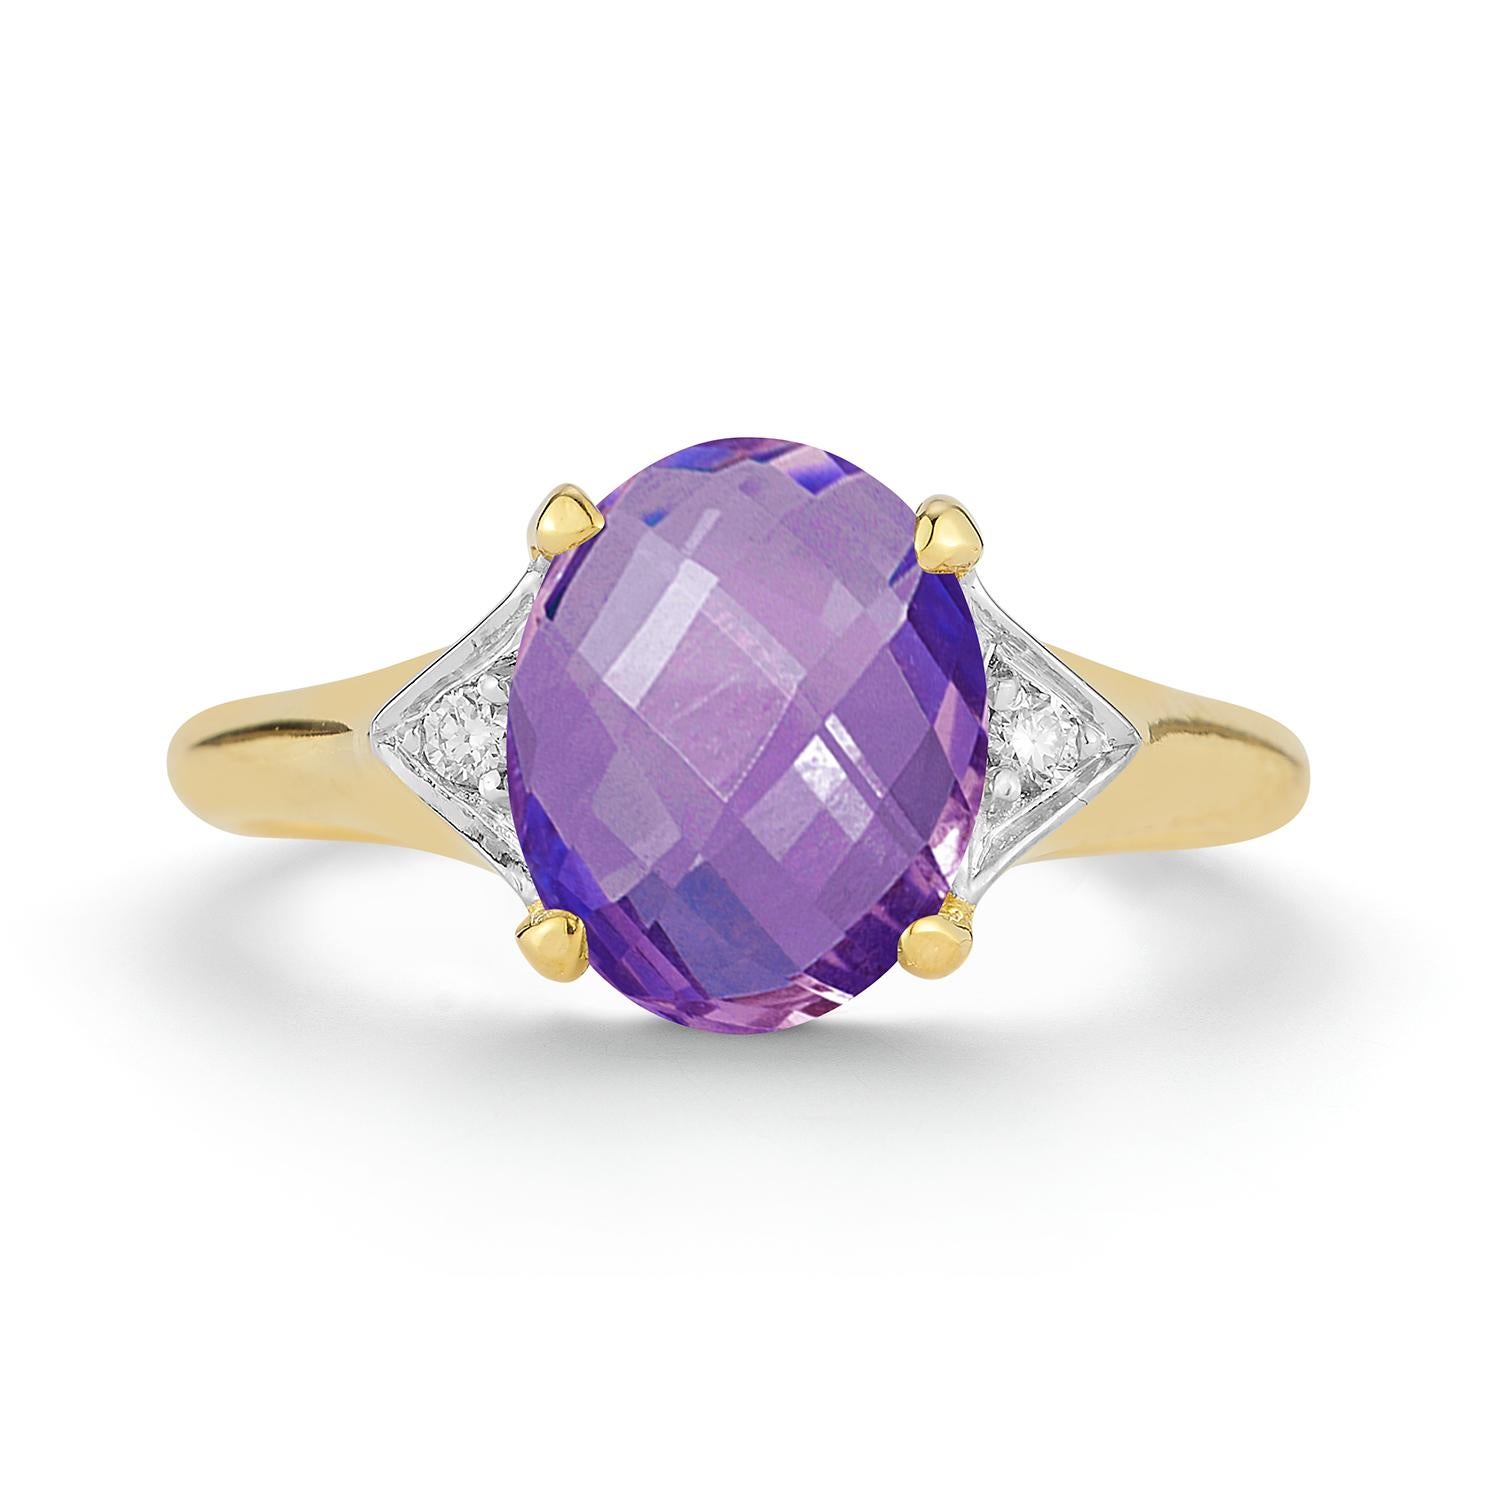 For Sale:  Hand-Crafted 14K Gold 0.05 ct. tw. Diamond & 5.35CT Amethyst Cocktail Ring 2